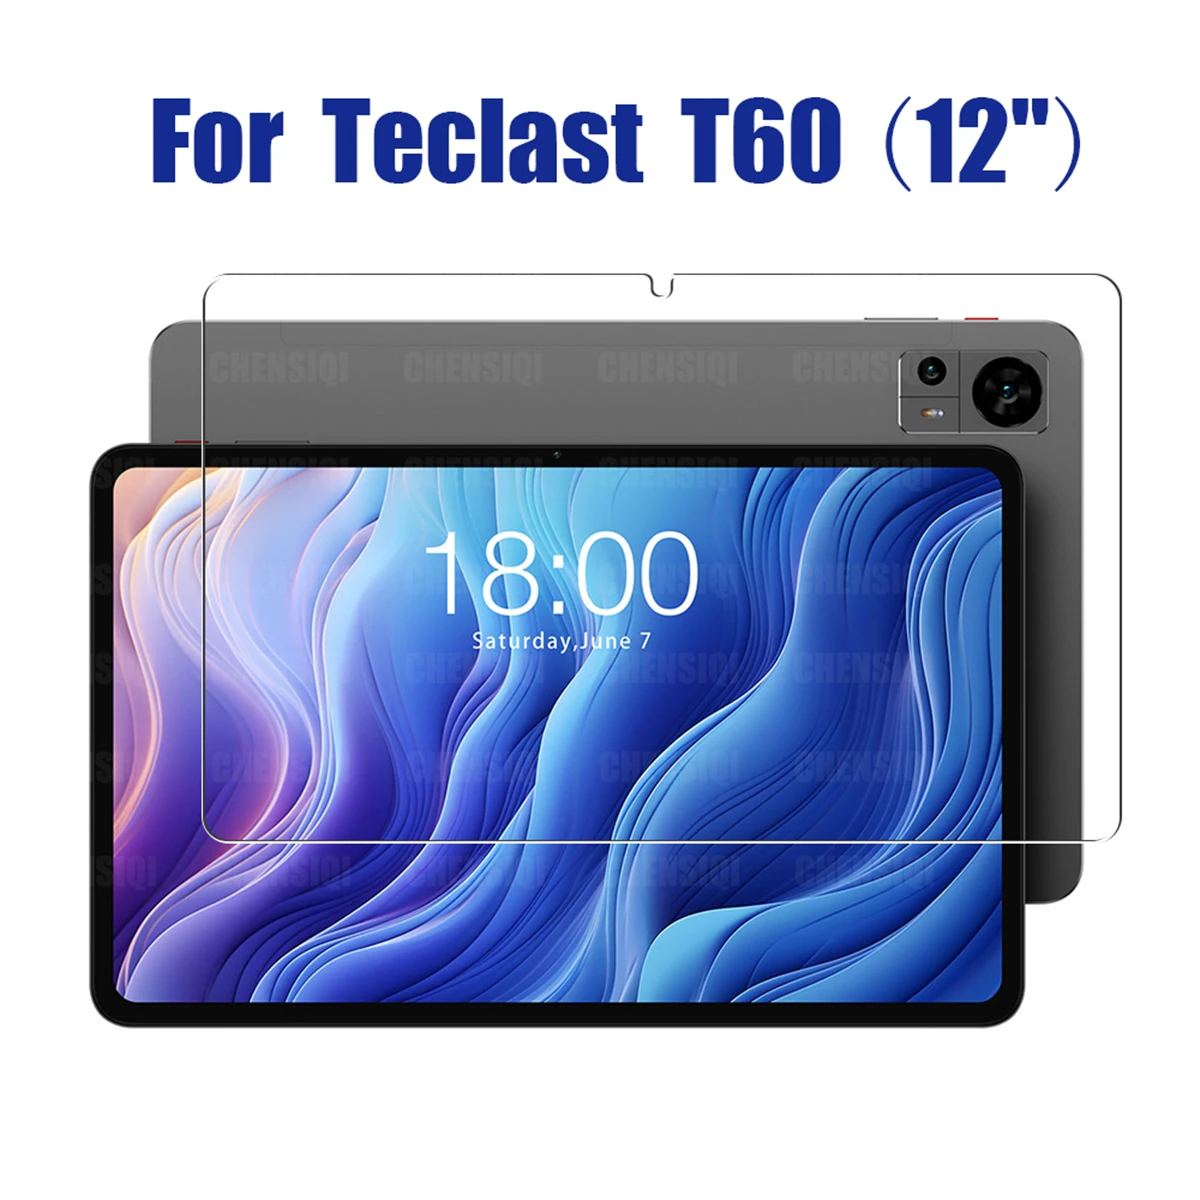 

Tempered Glass film for Teclast T60 12 Inch Tablet 9H Hardness HD Anti-Scratch Screen Protector for Teclast T60 12"